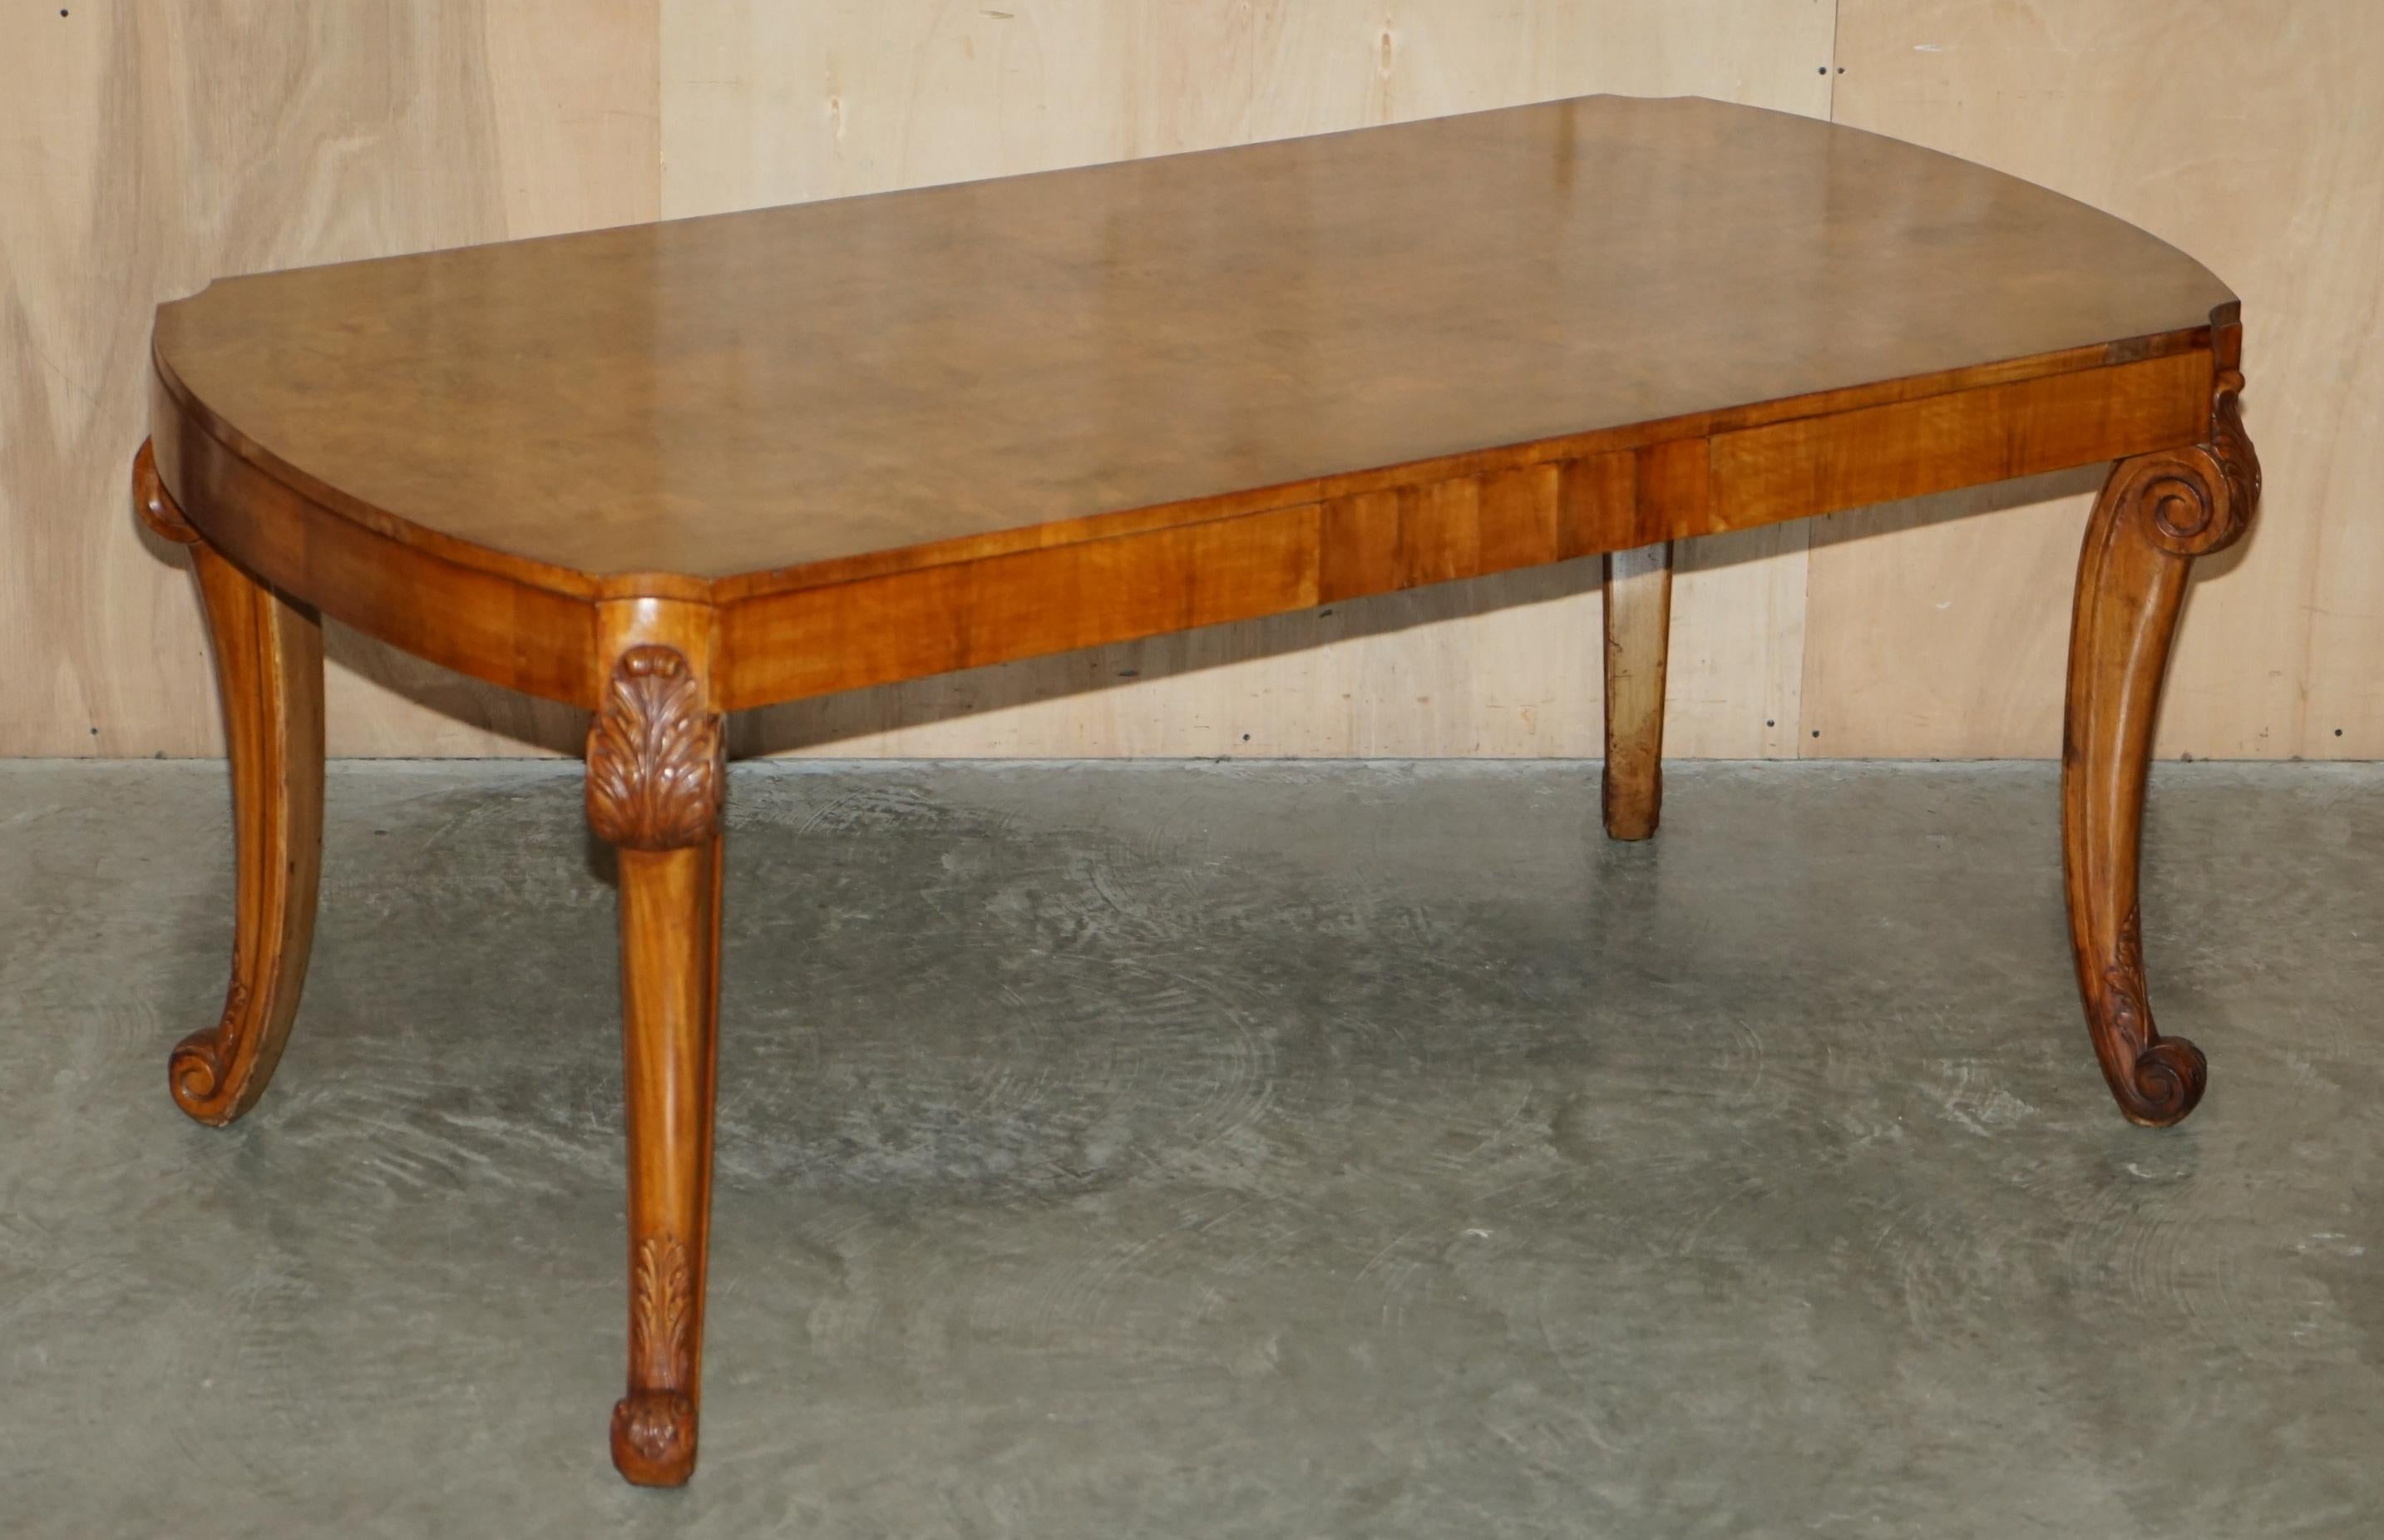 We are delighted to offer for sale this exquisite heavily carved Art Deco Burr Walnut dining table with six sculptural dining chairs

A beautiful example of this kind of work, the cuts of walnut are truly sublime, the table leg carving is second